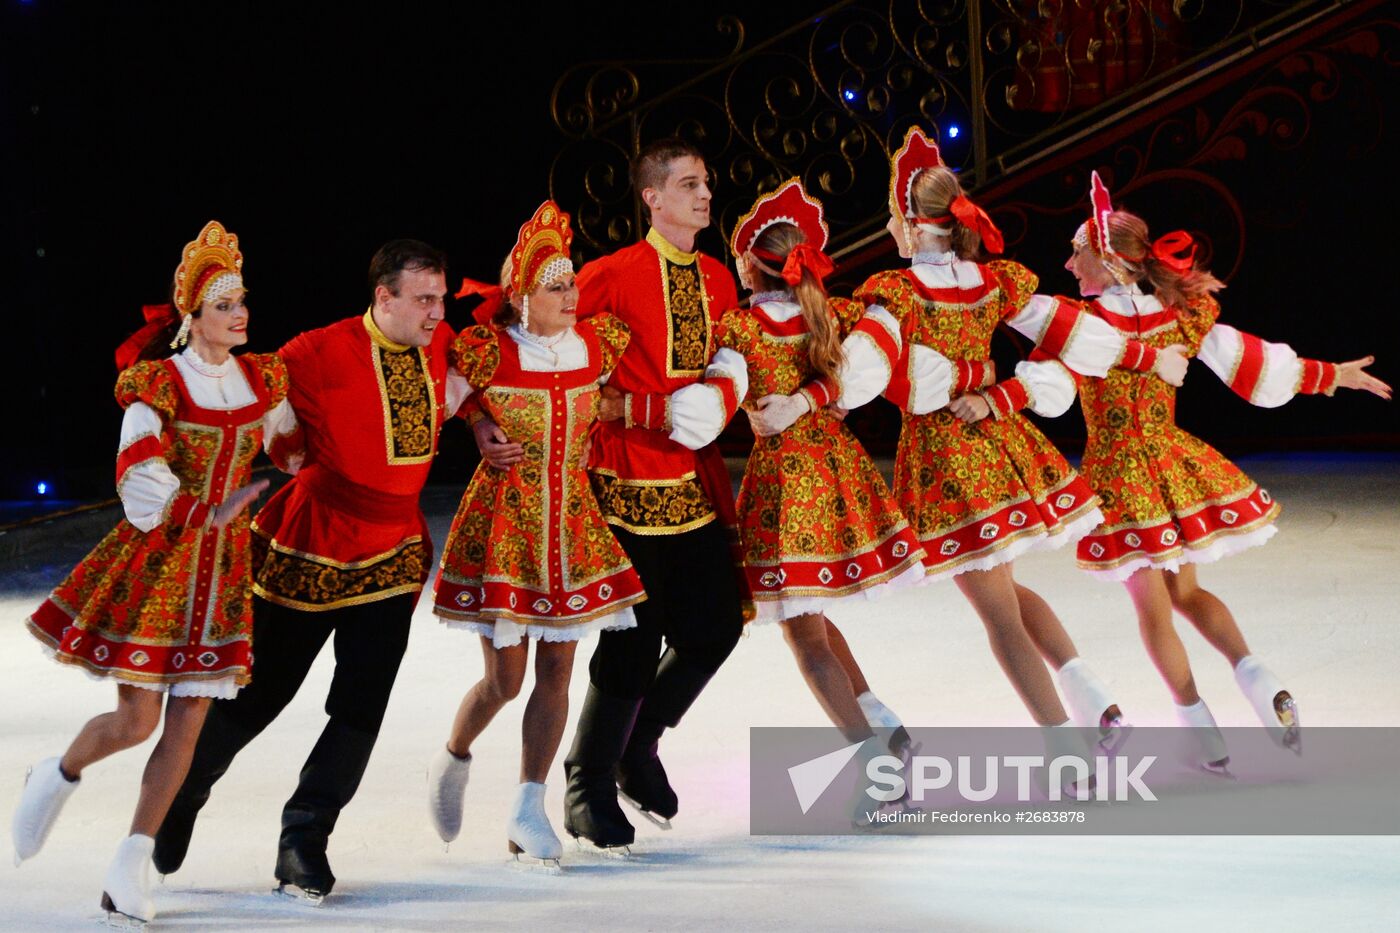 Ice show "The Bird of Happiness" premieres at Russian Song Theater